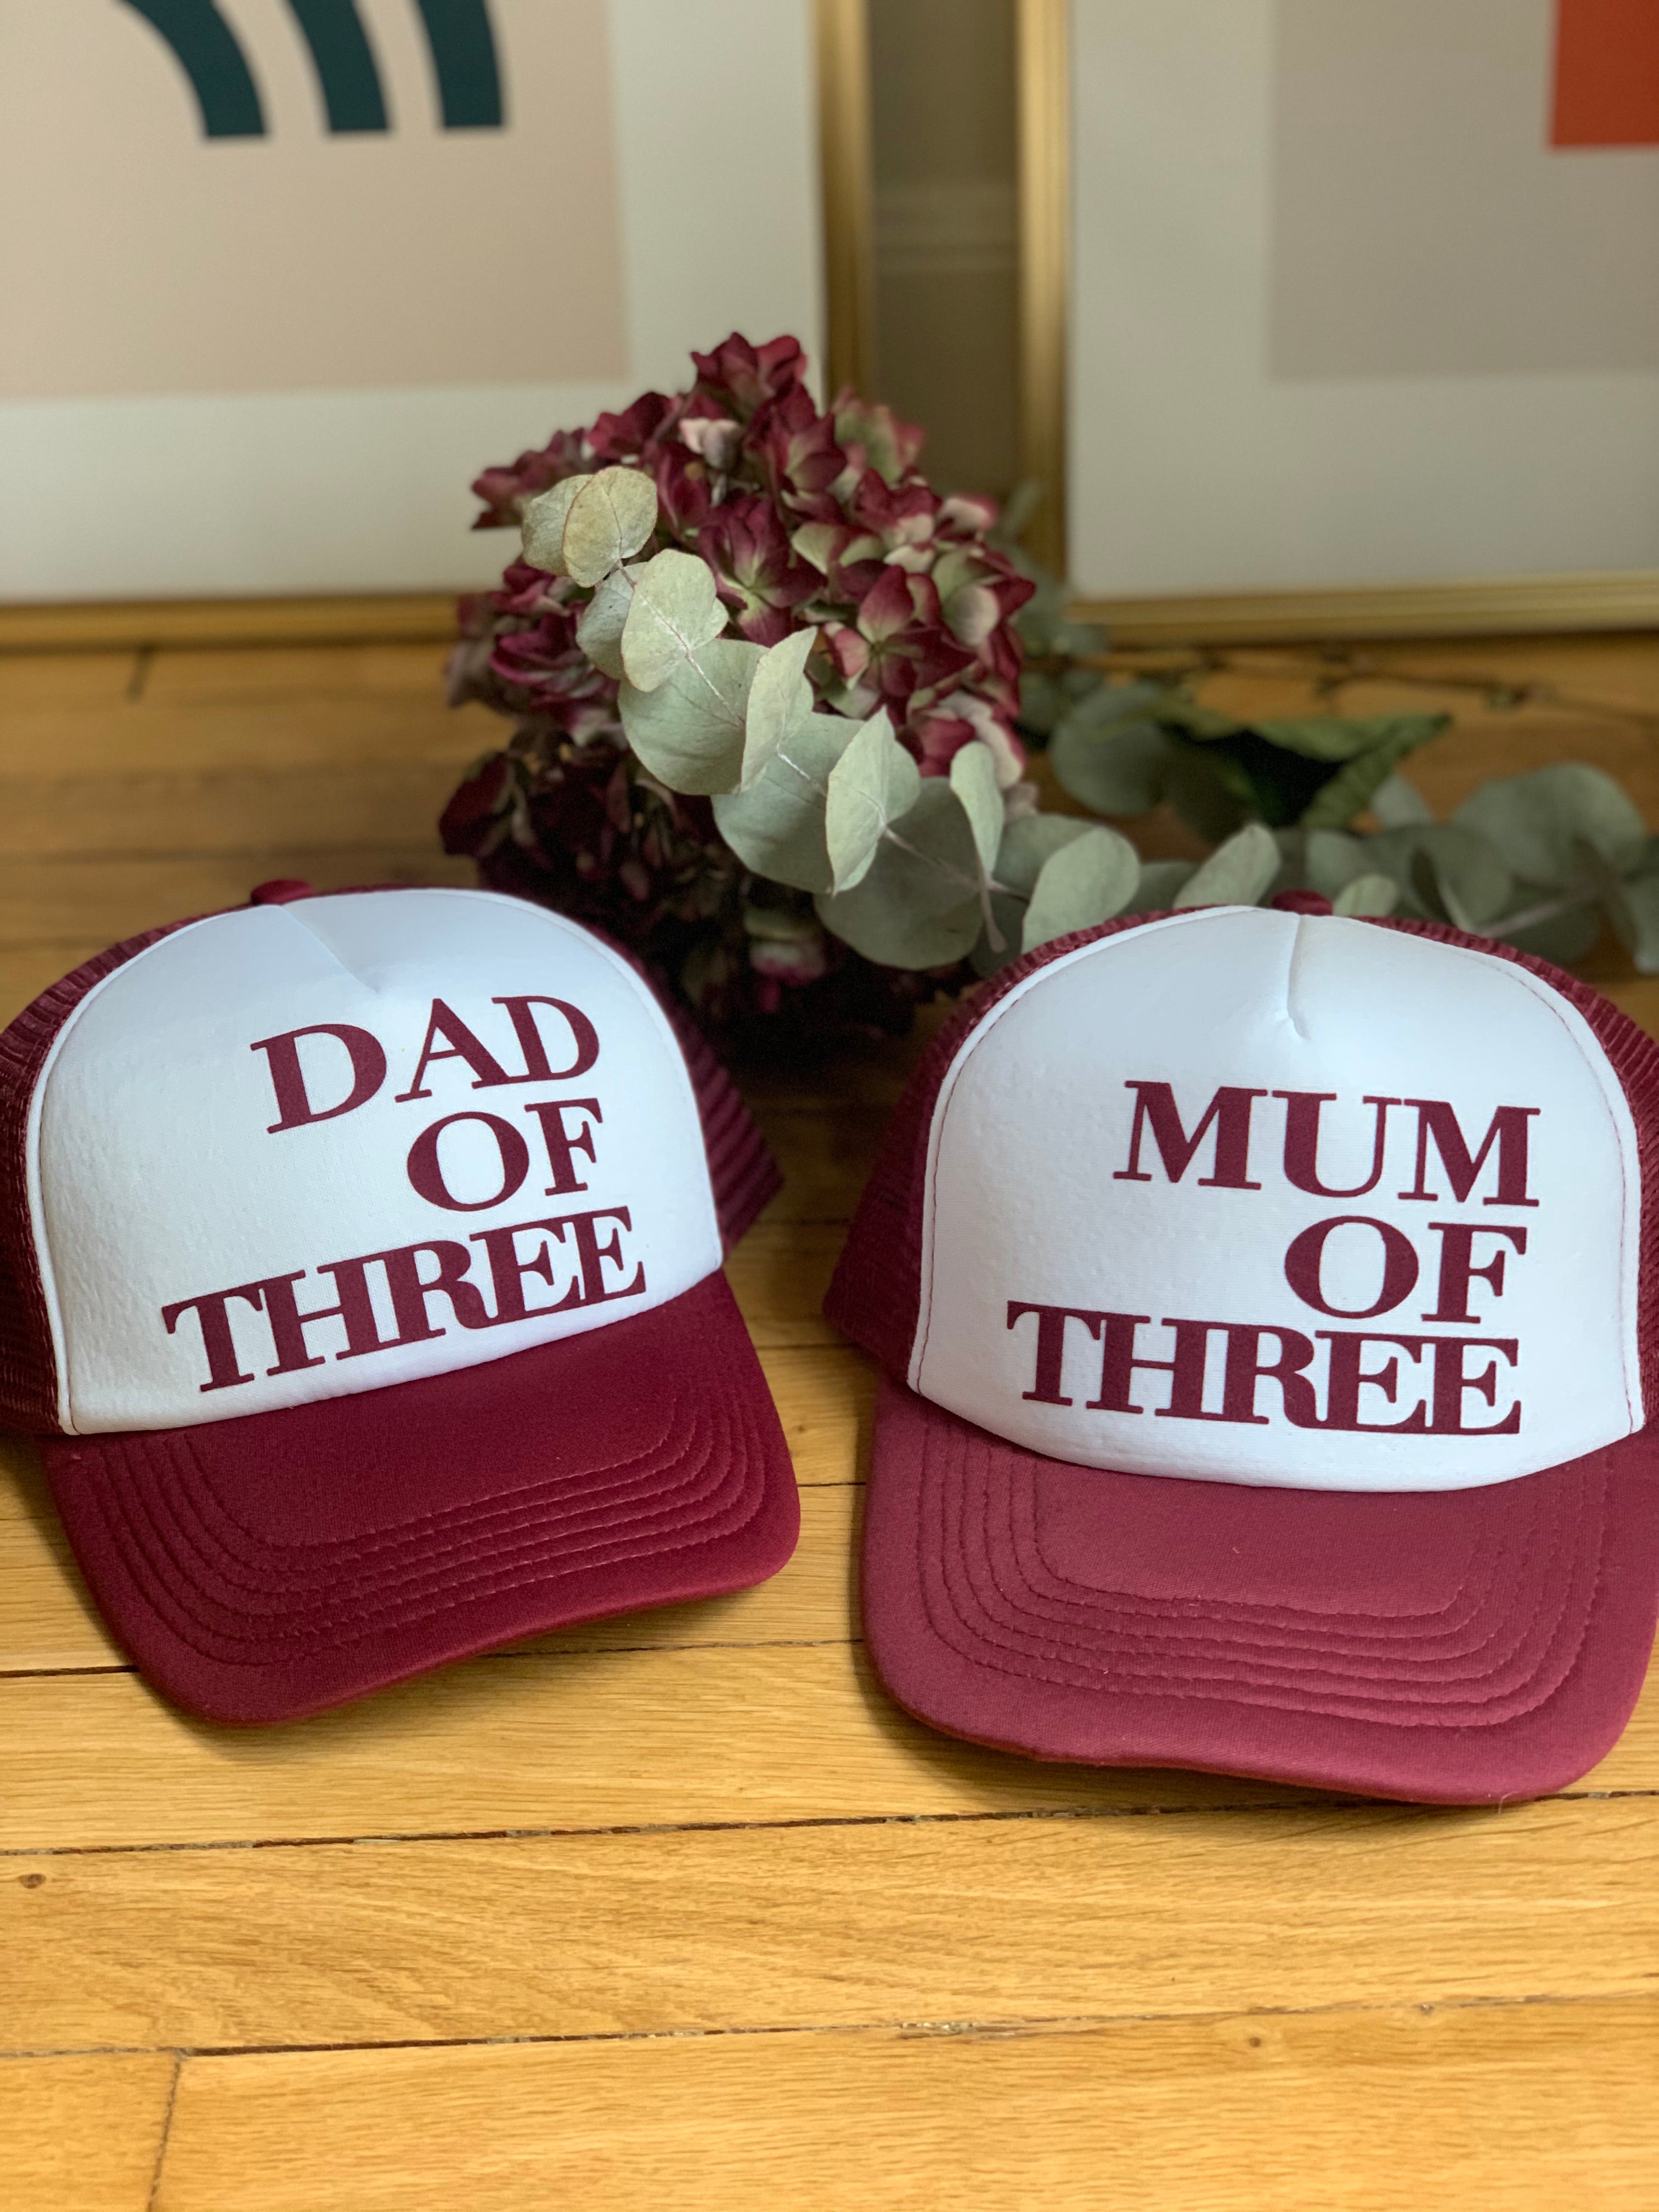 MUM OF CAP - BORDEAUX RED AND WHITE - Available for MUM OF ONE, TWO, THREE...